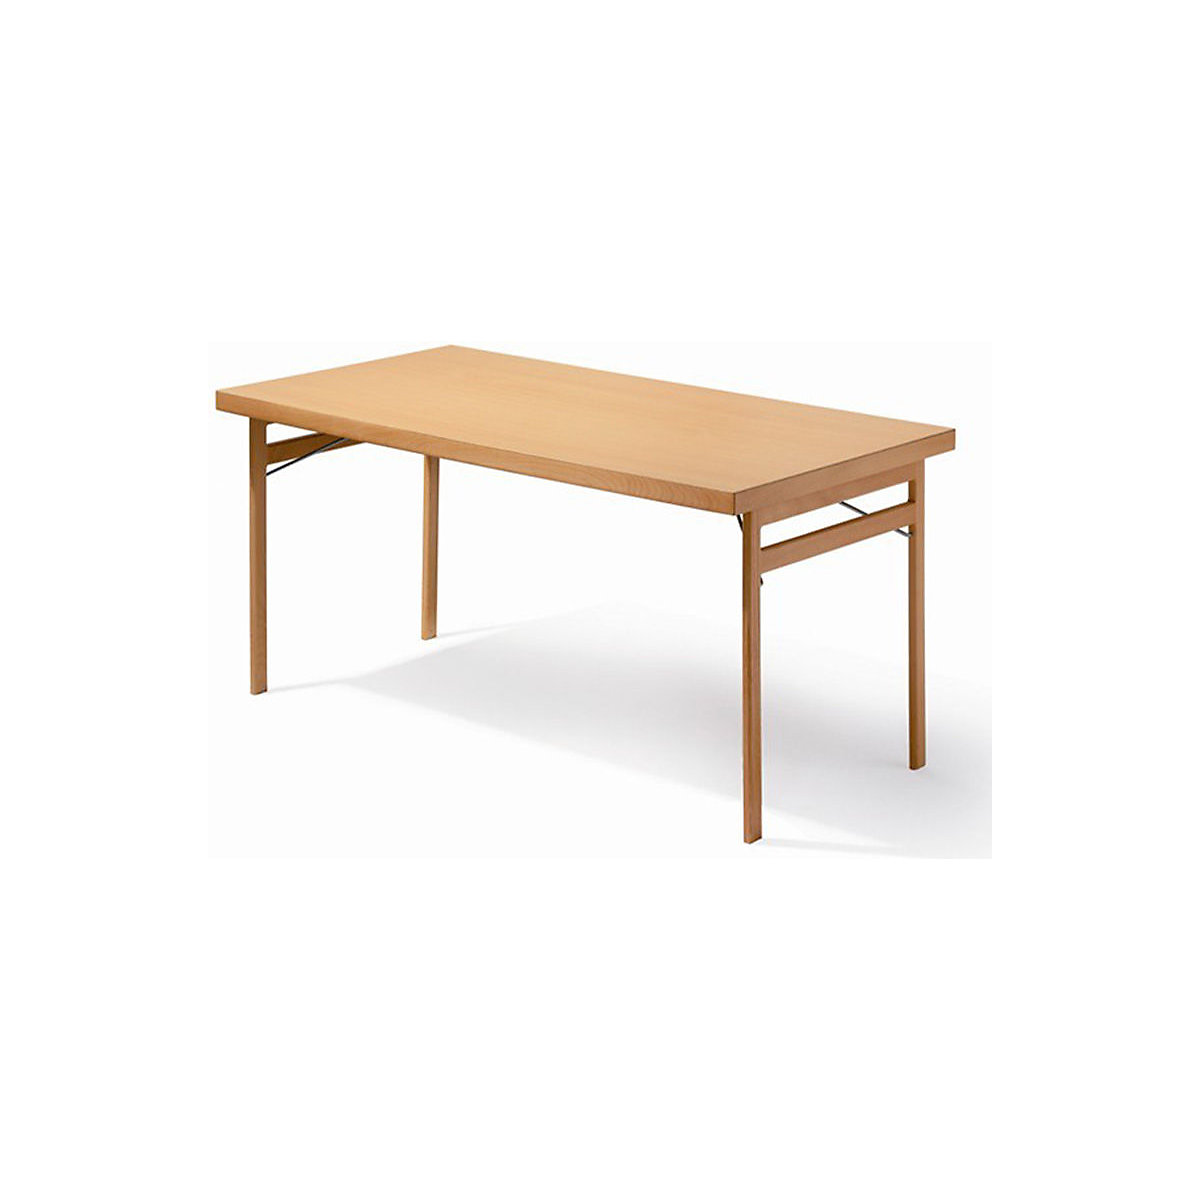 Folding table, solid wood frame, beech, WxD 1500 x 800 mm, laminate tabletop-5